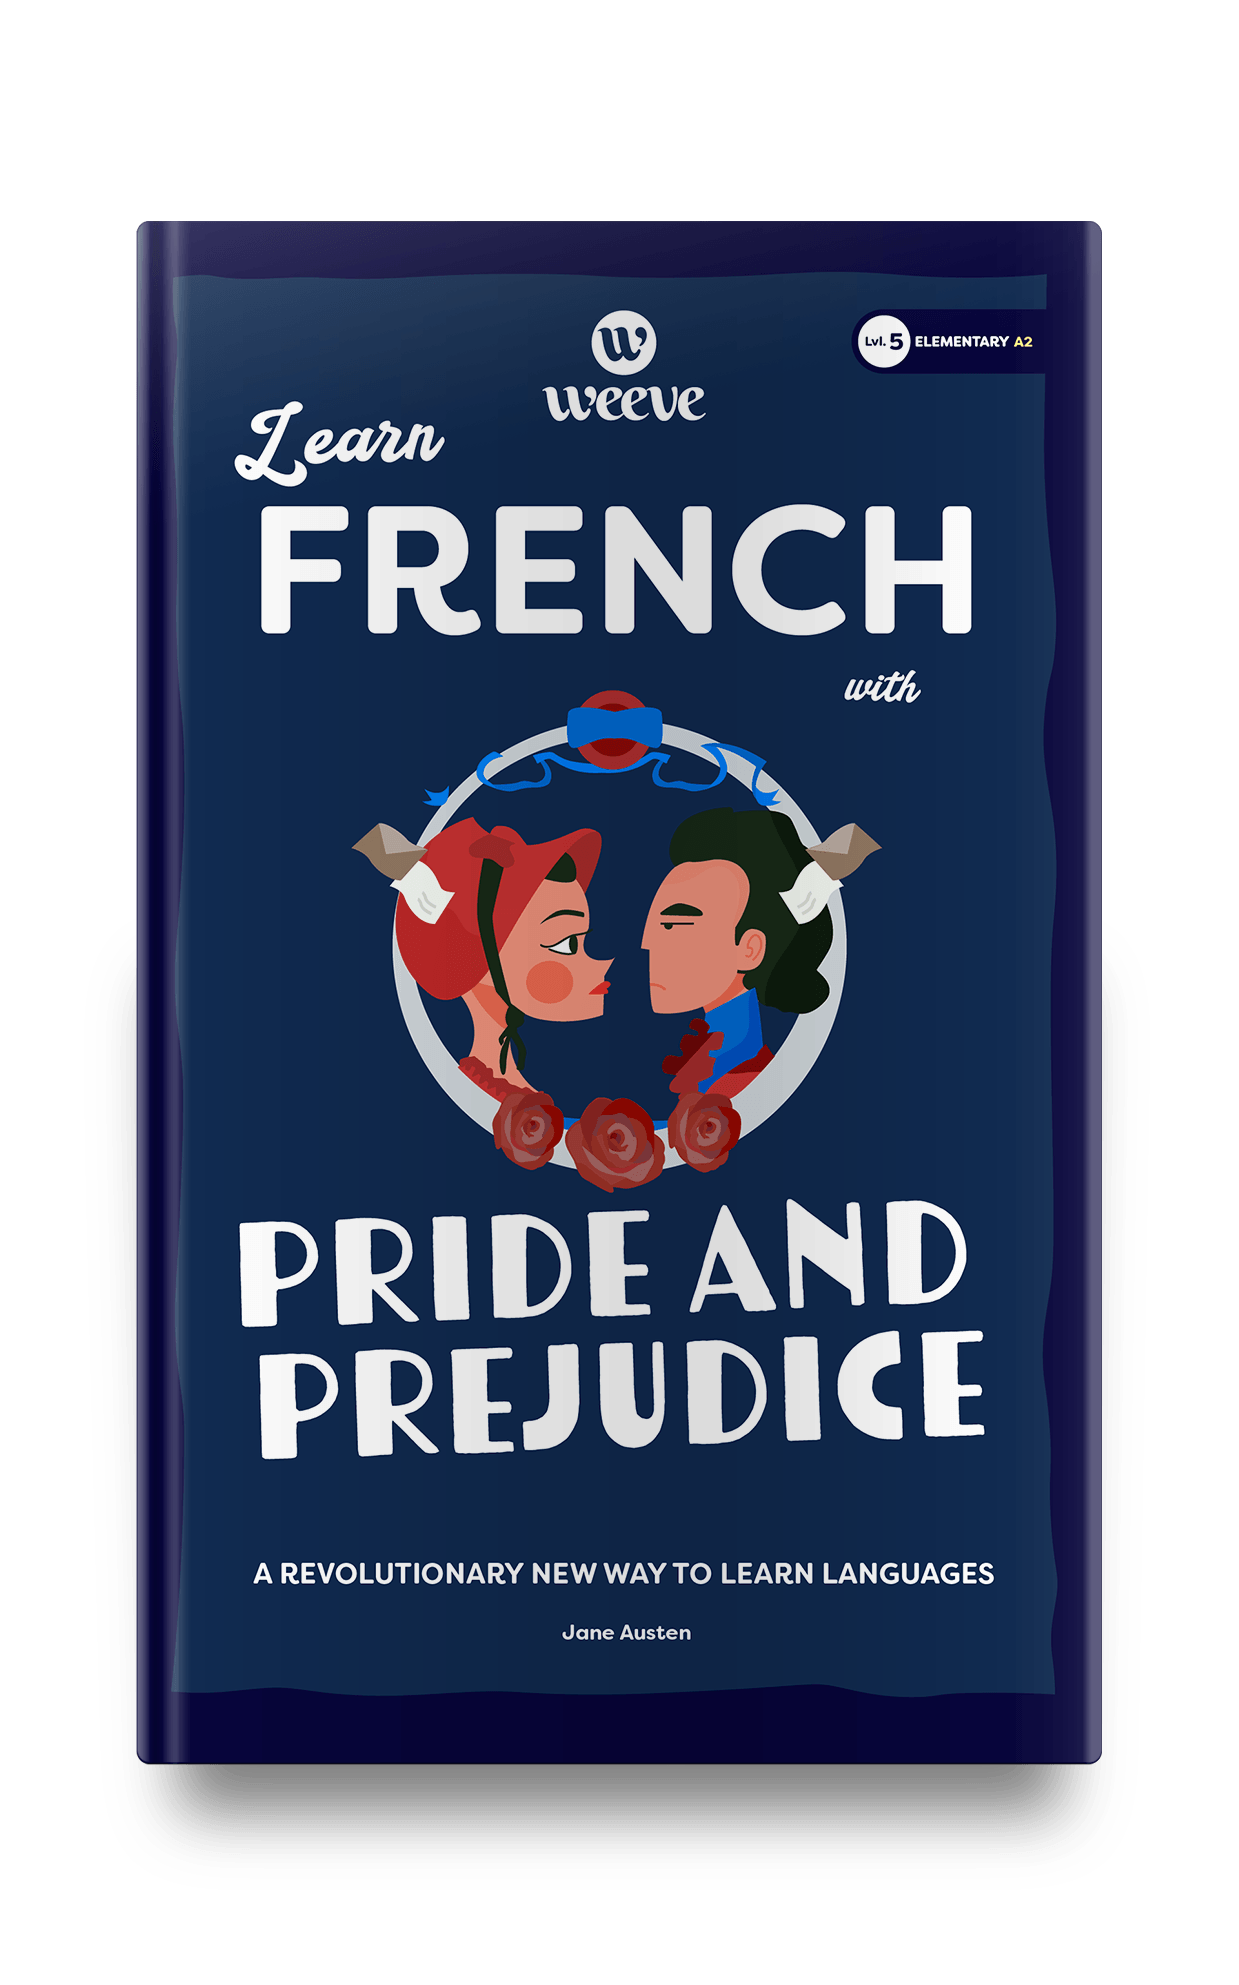 Learn French With Pride and Prejudice - Weeve